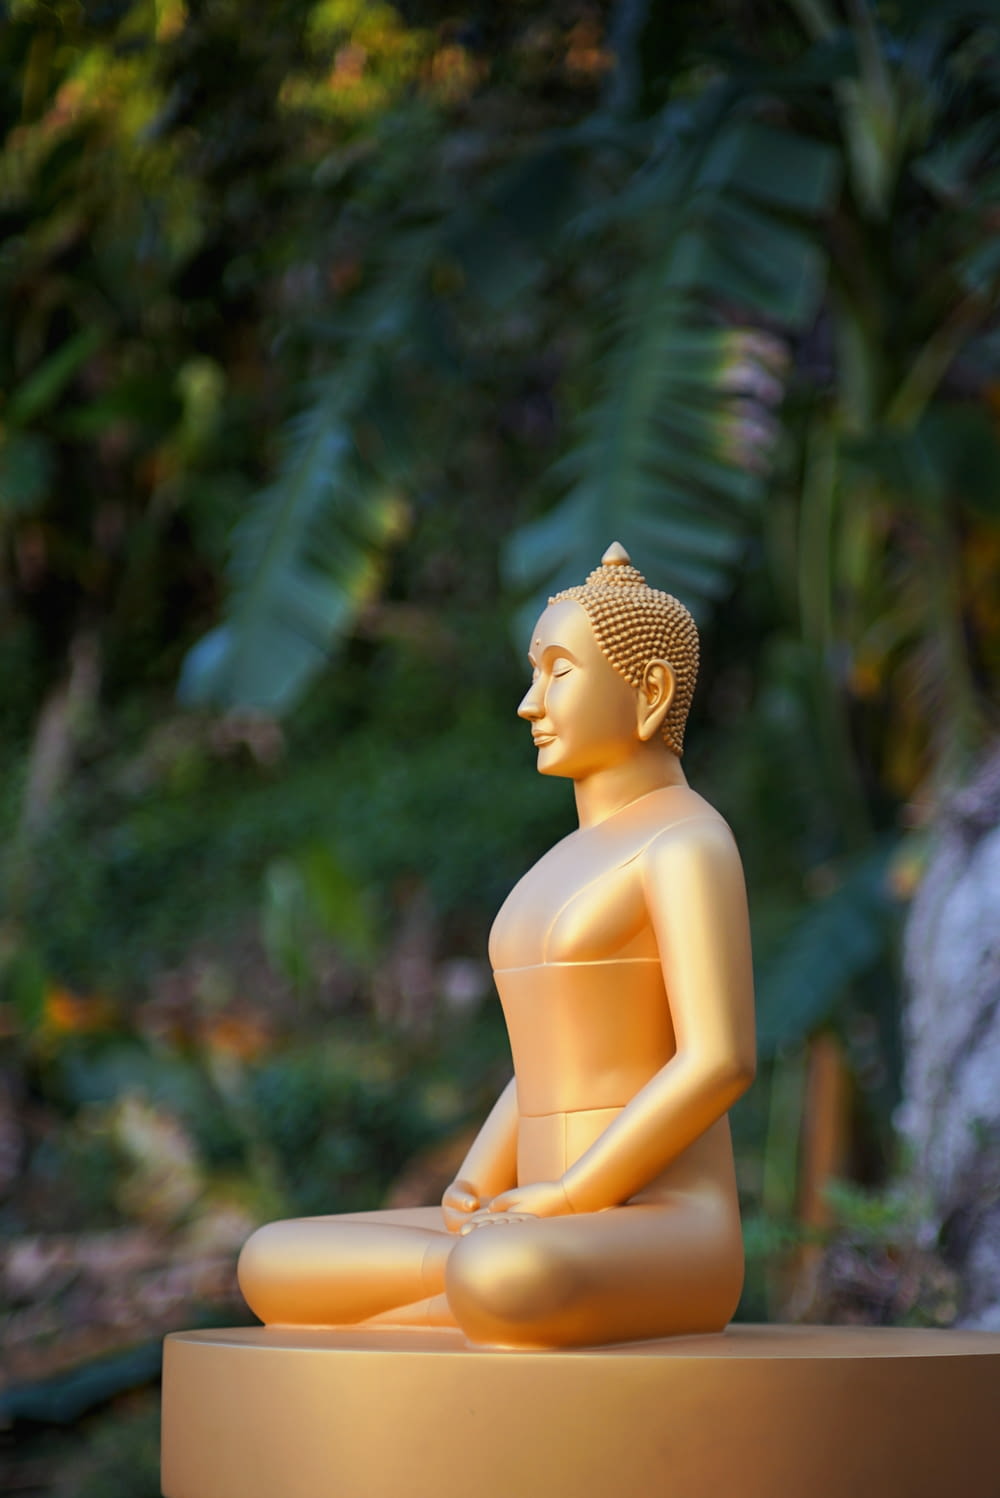 a statue of a buddha sitting in a meditation position